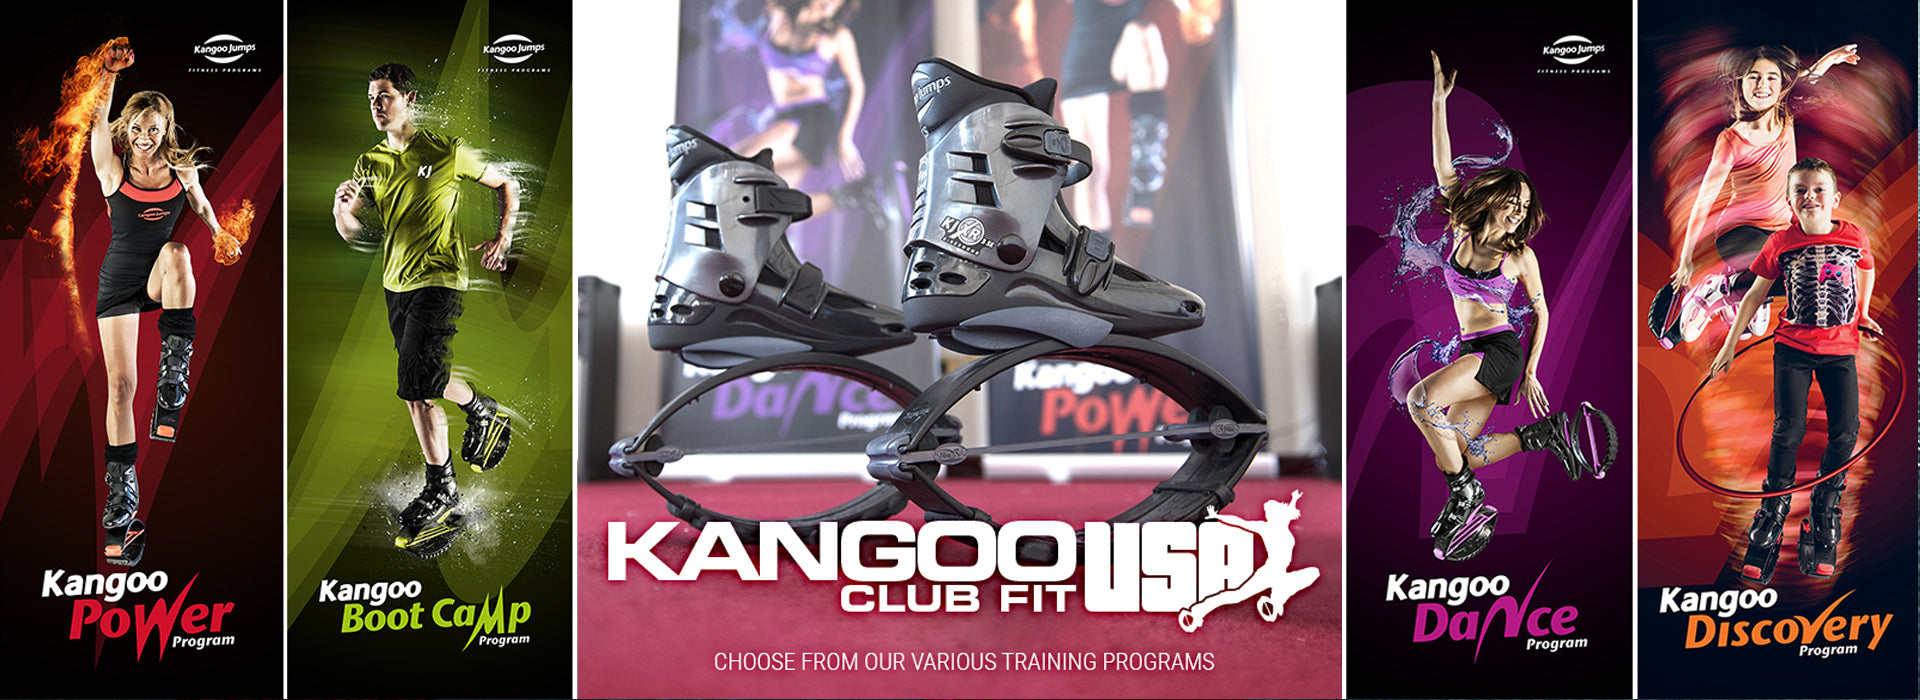 Comparing The Bounce Boots Vs Kangoo Jumps Bands or Springs Difference 